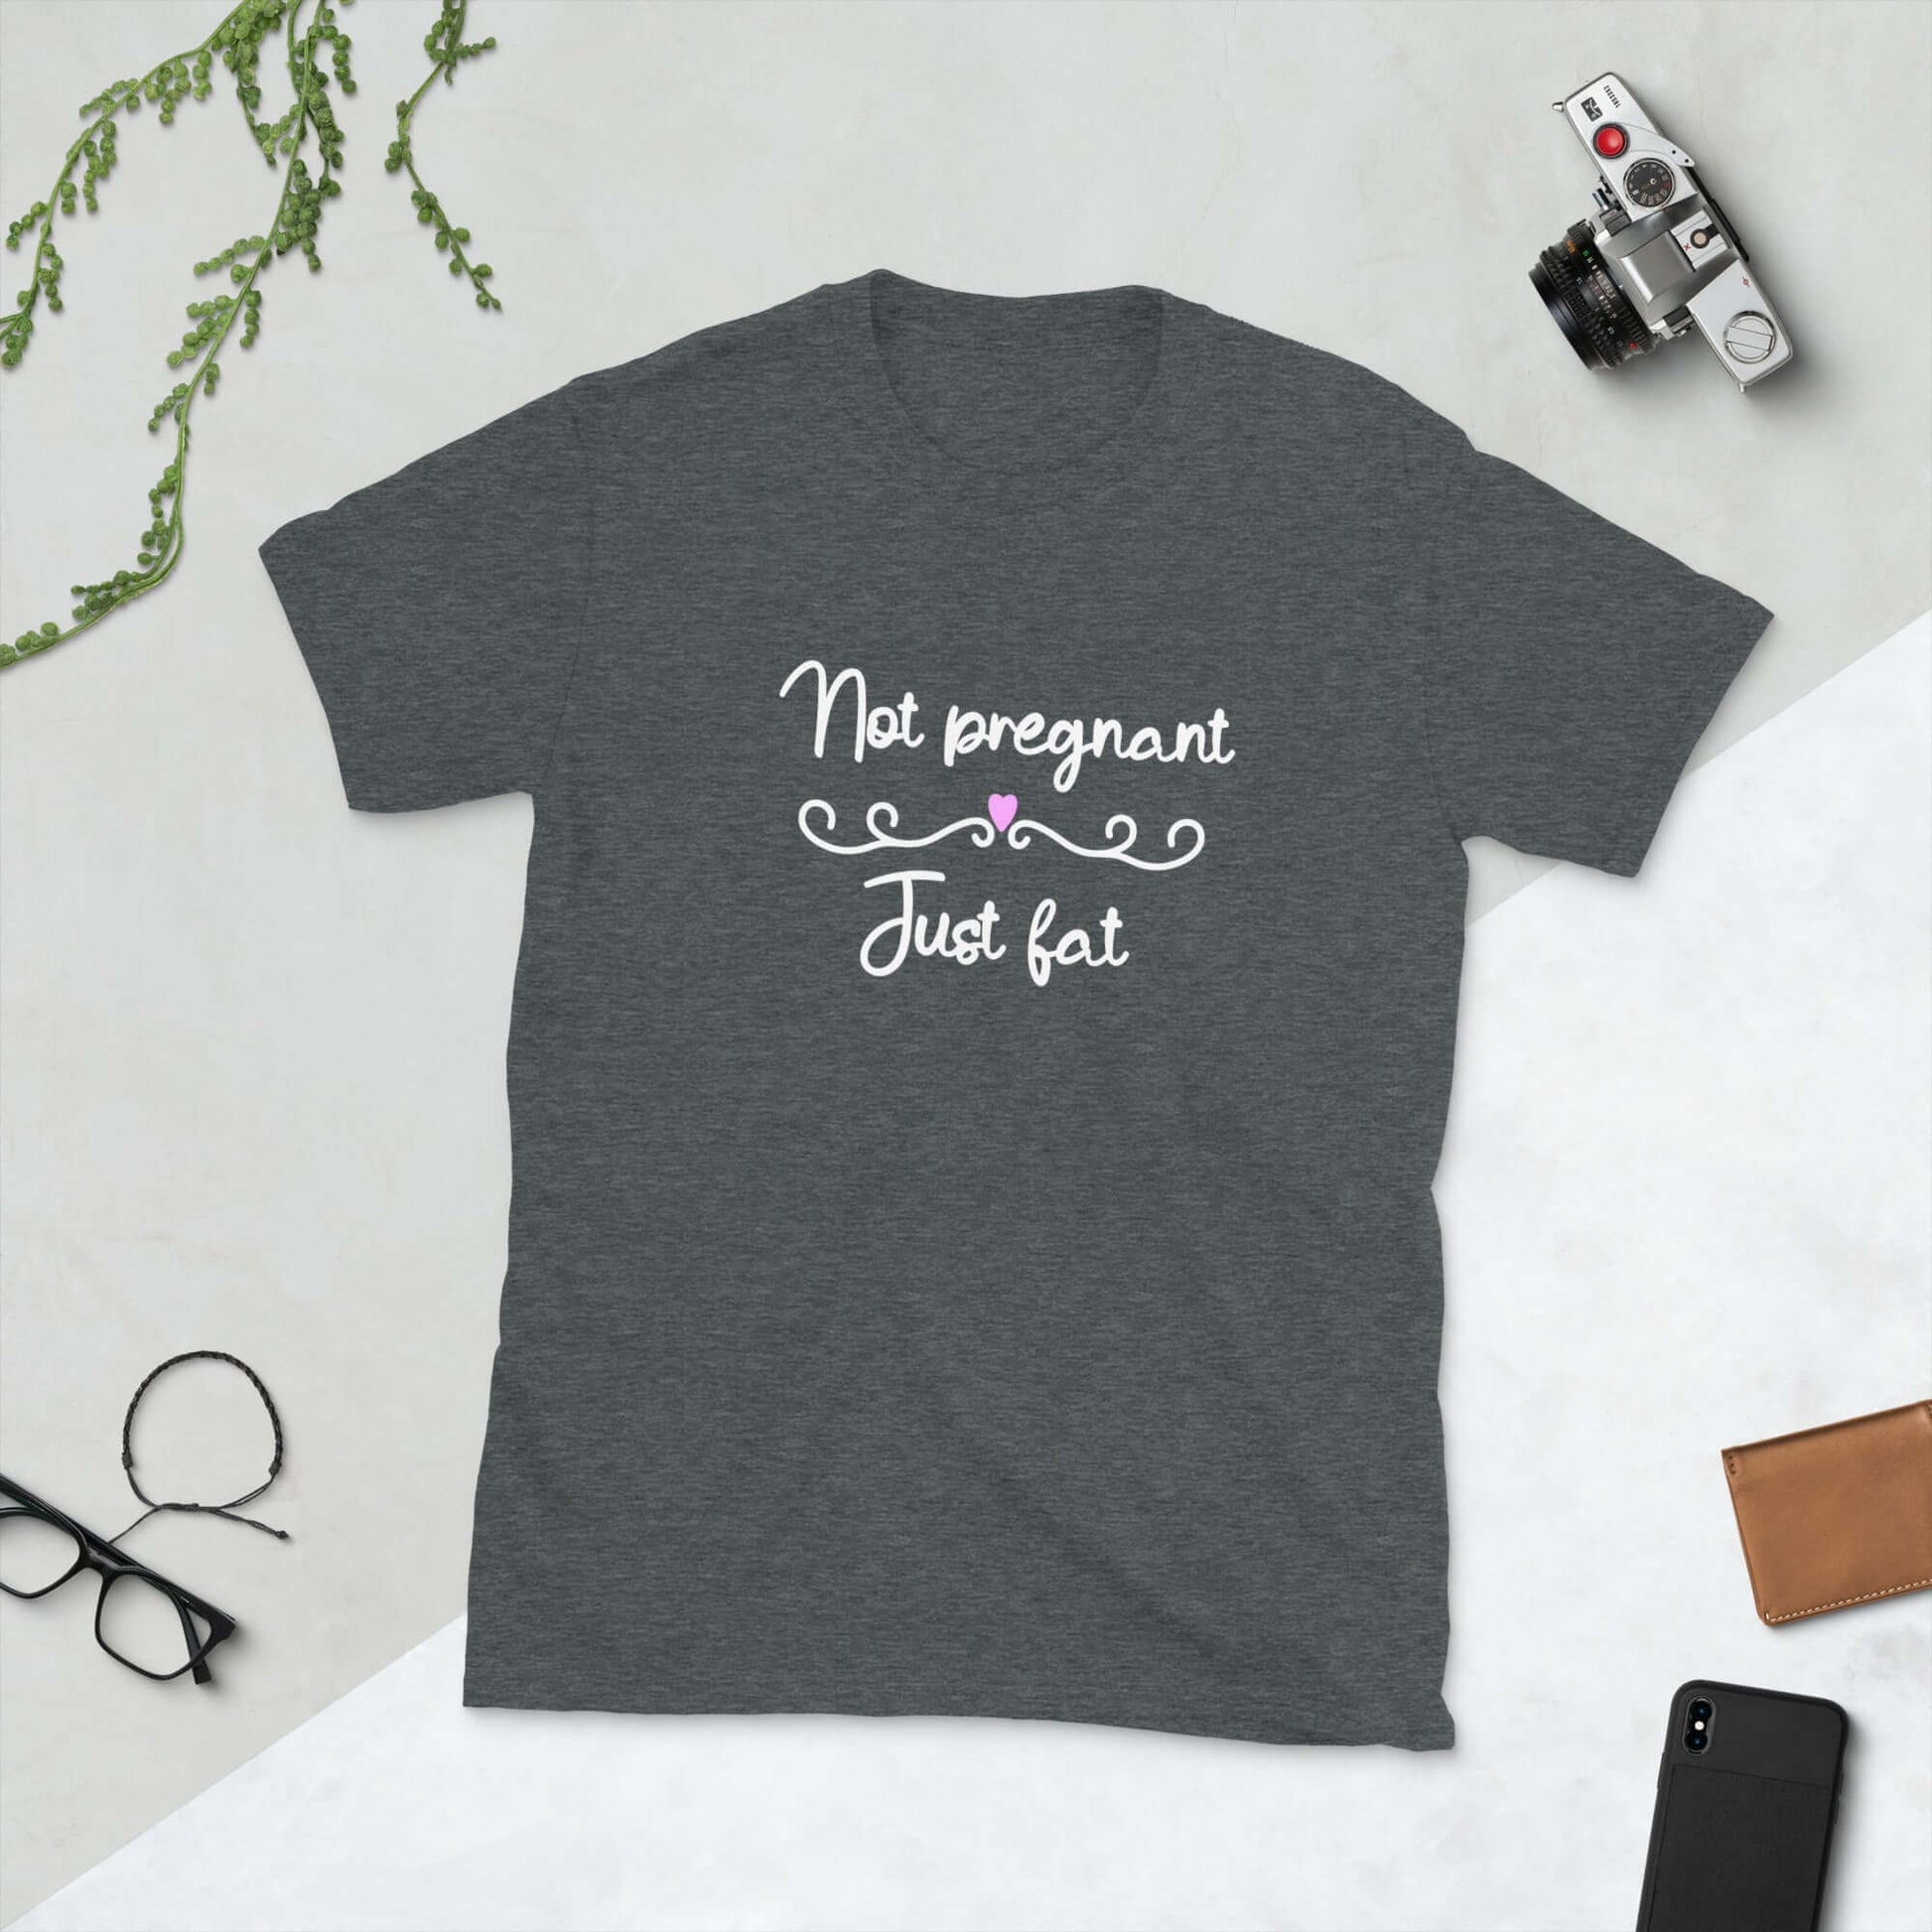 Dark grey t-shirt with the words Not pregnant just fat printed on the front with a heart.